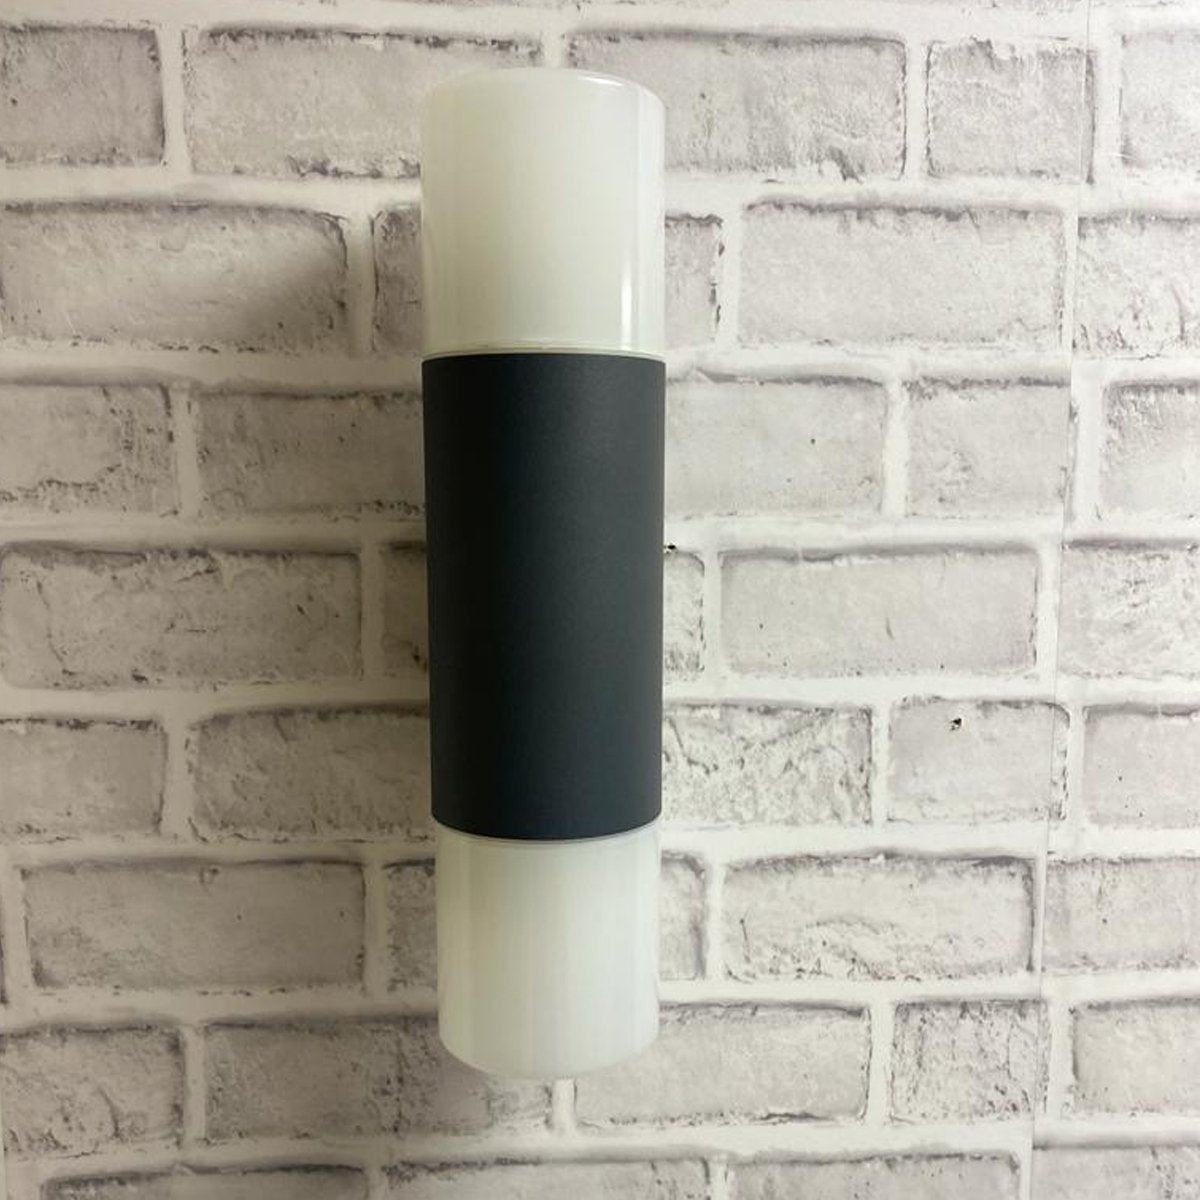 Our Cortez wall light looks great in modern settings. This wall light has a modern tube design with anthracite finish aluminium body and 2 polycarbonate opal diffusers. This wall light is perfect for any outdoor space requiring light and security such as gardens, driveways, doorways workspaces, pubs and hotels.